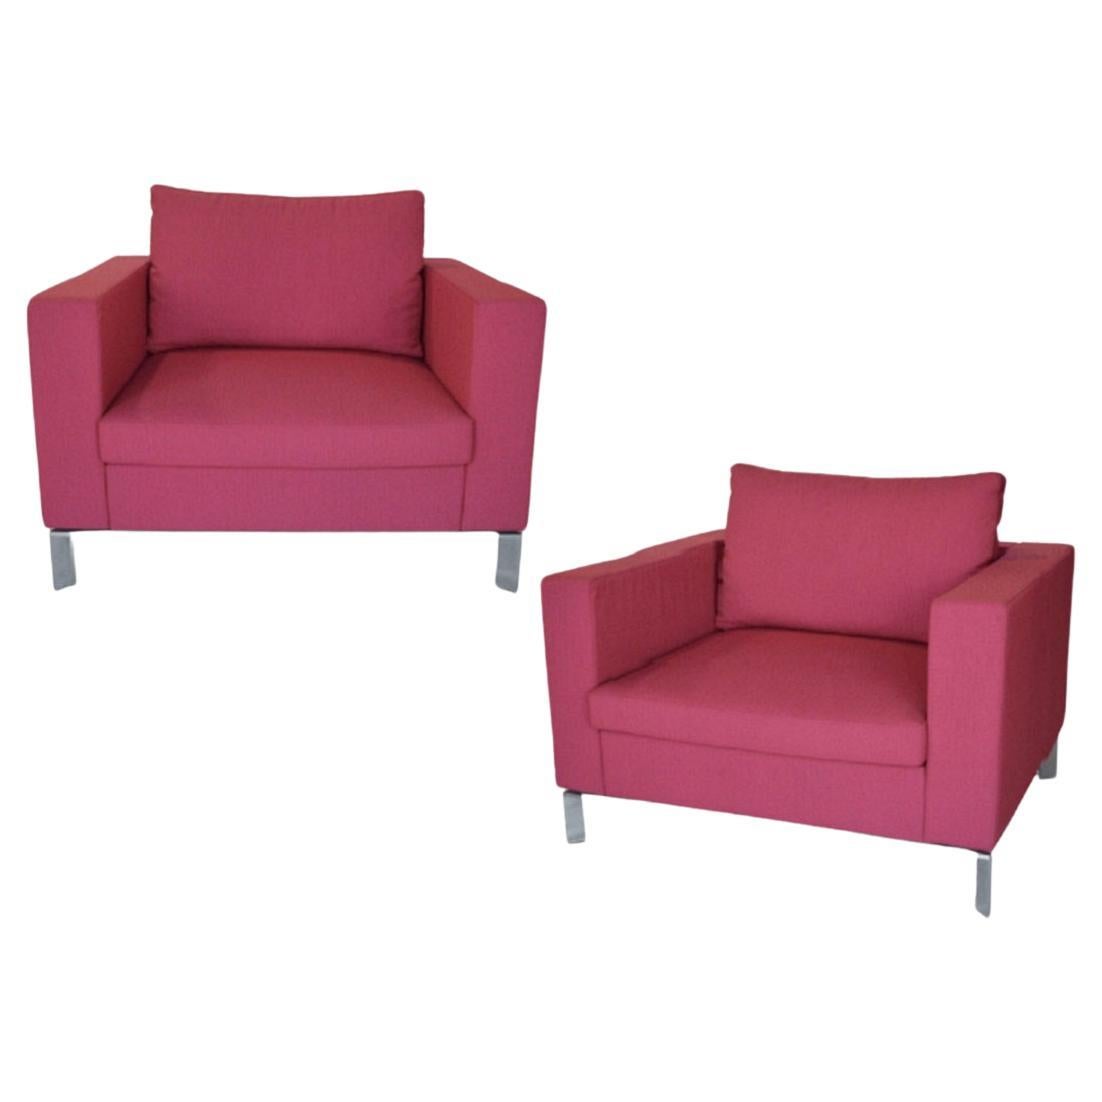 Pair of Pink Upholstered Allermuir Stirling Armchairs, England, C. 2000s For Sale